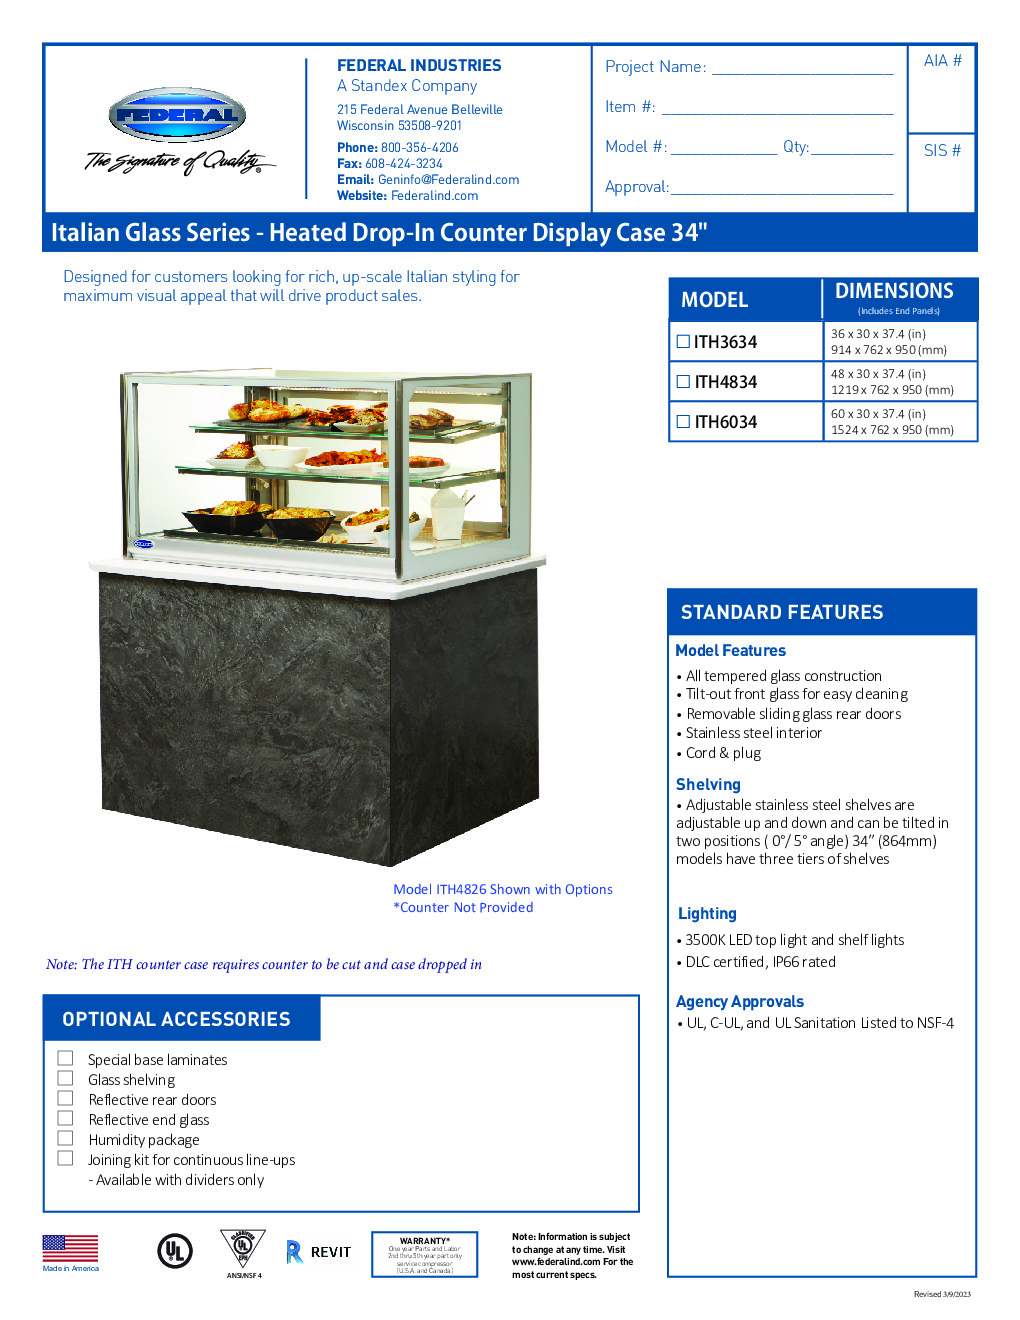 Federal Industries ITH4834 Drop-In Heated Display Case